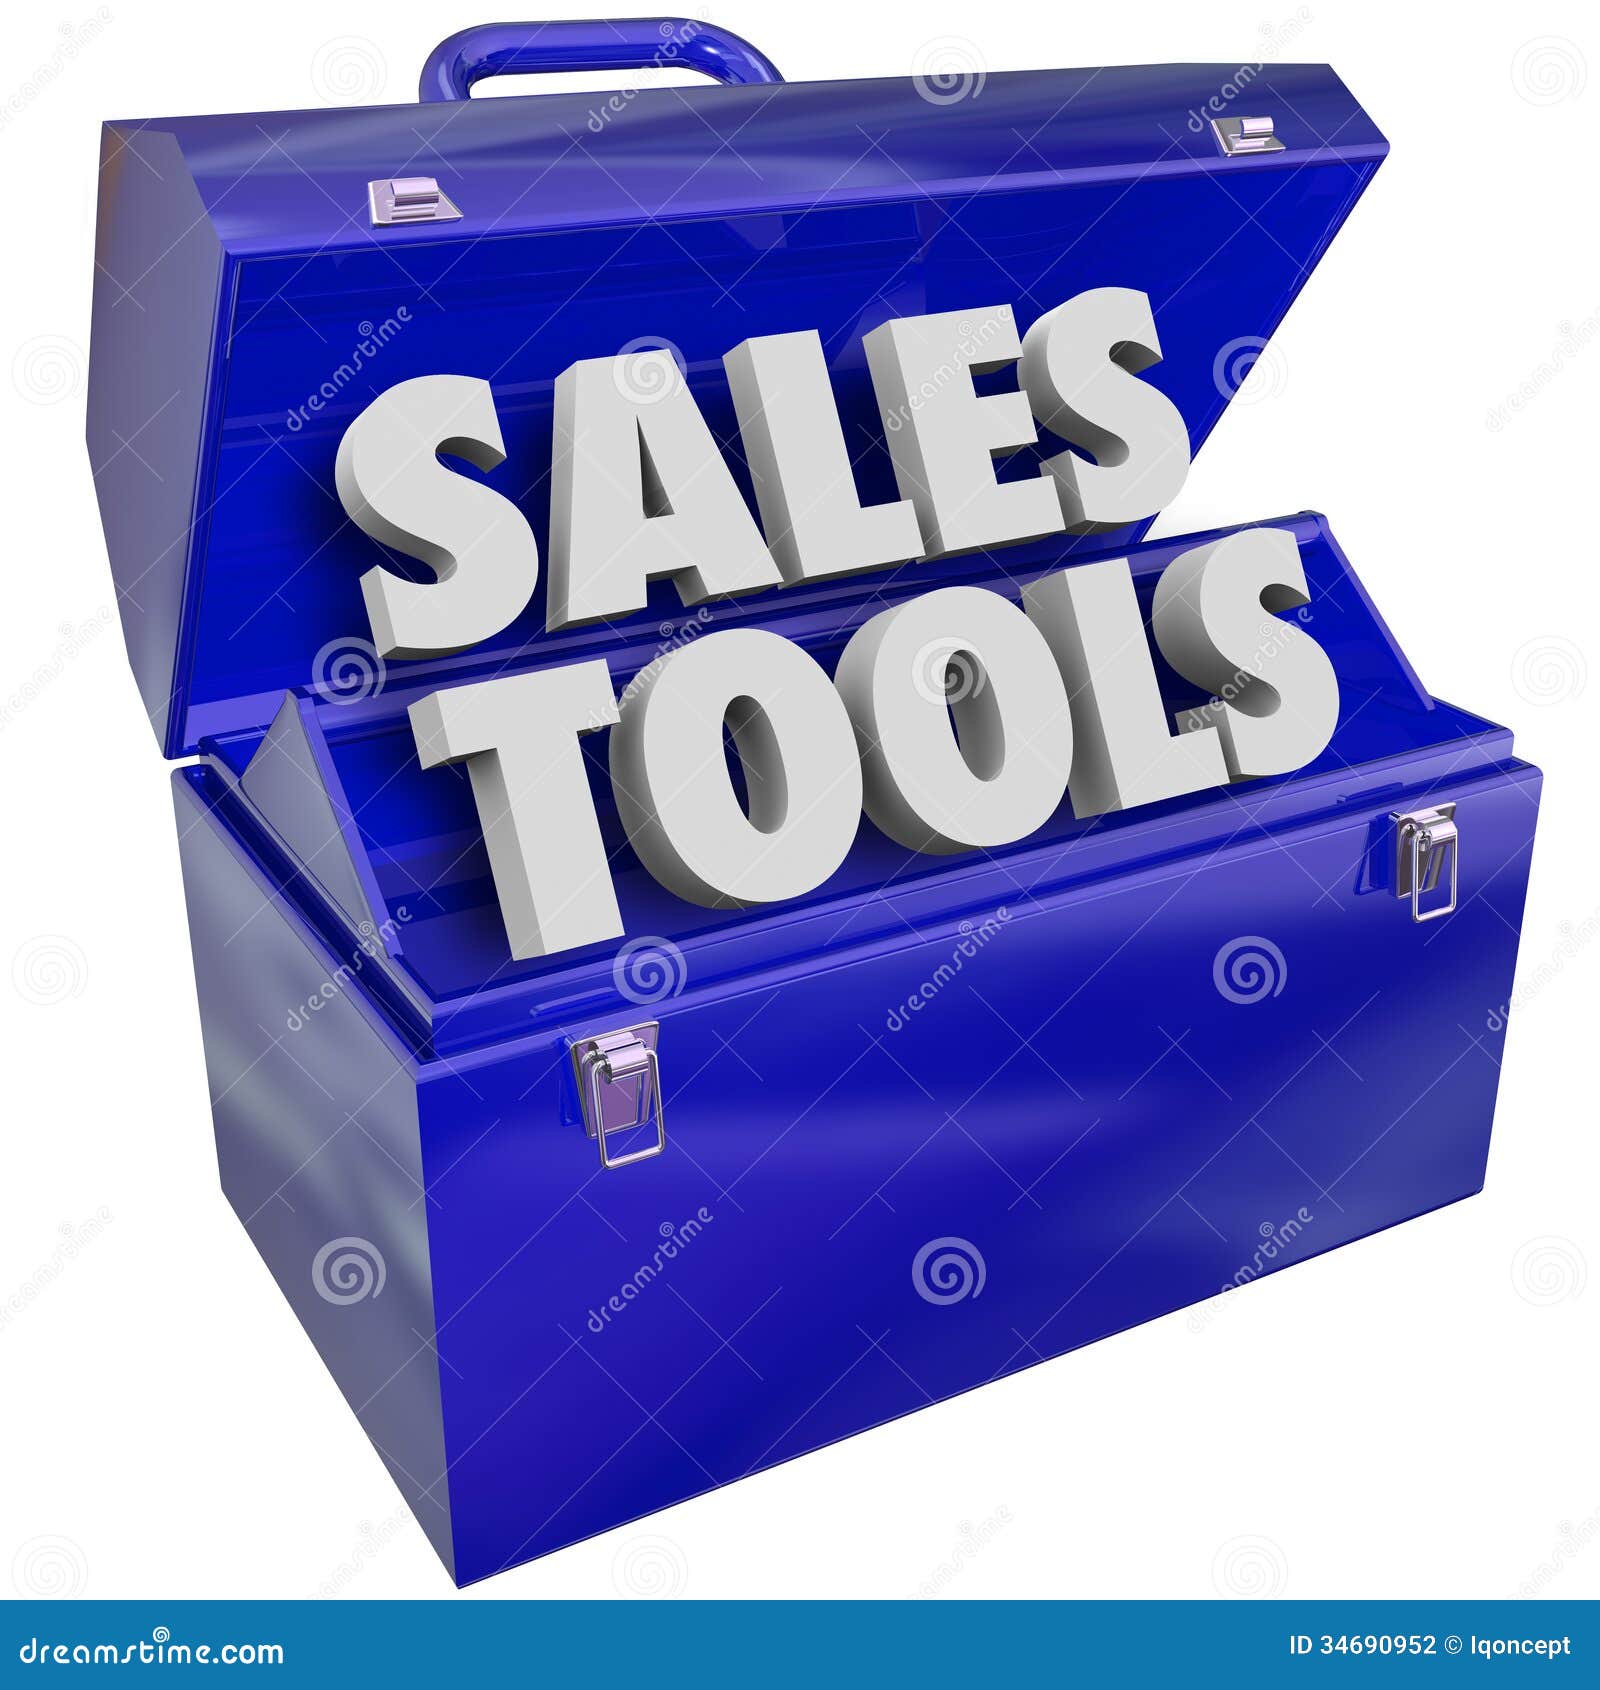 sales tools and techniques